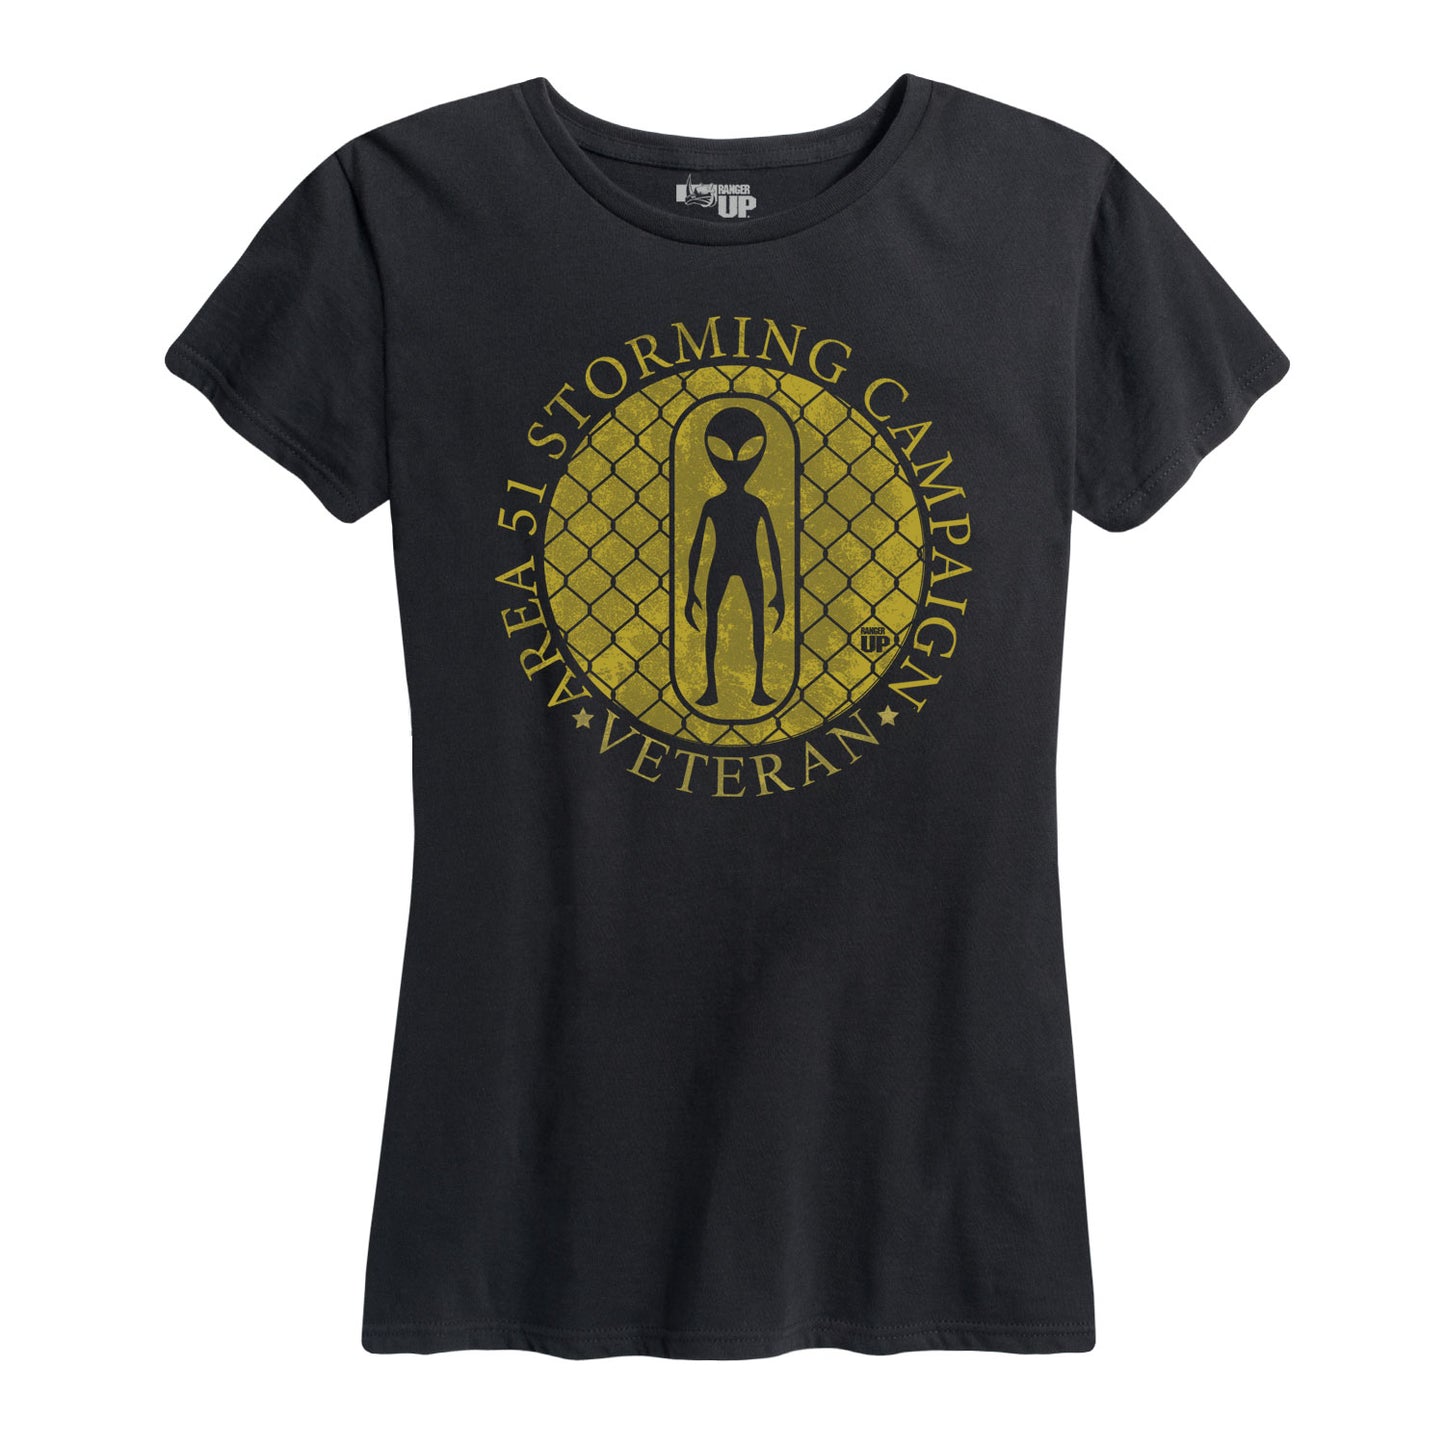 Women's Area 51 Campaign Medal Tee